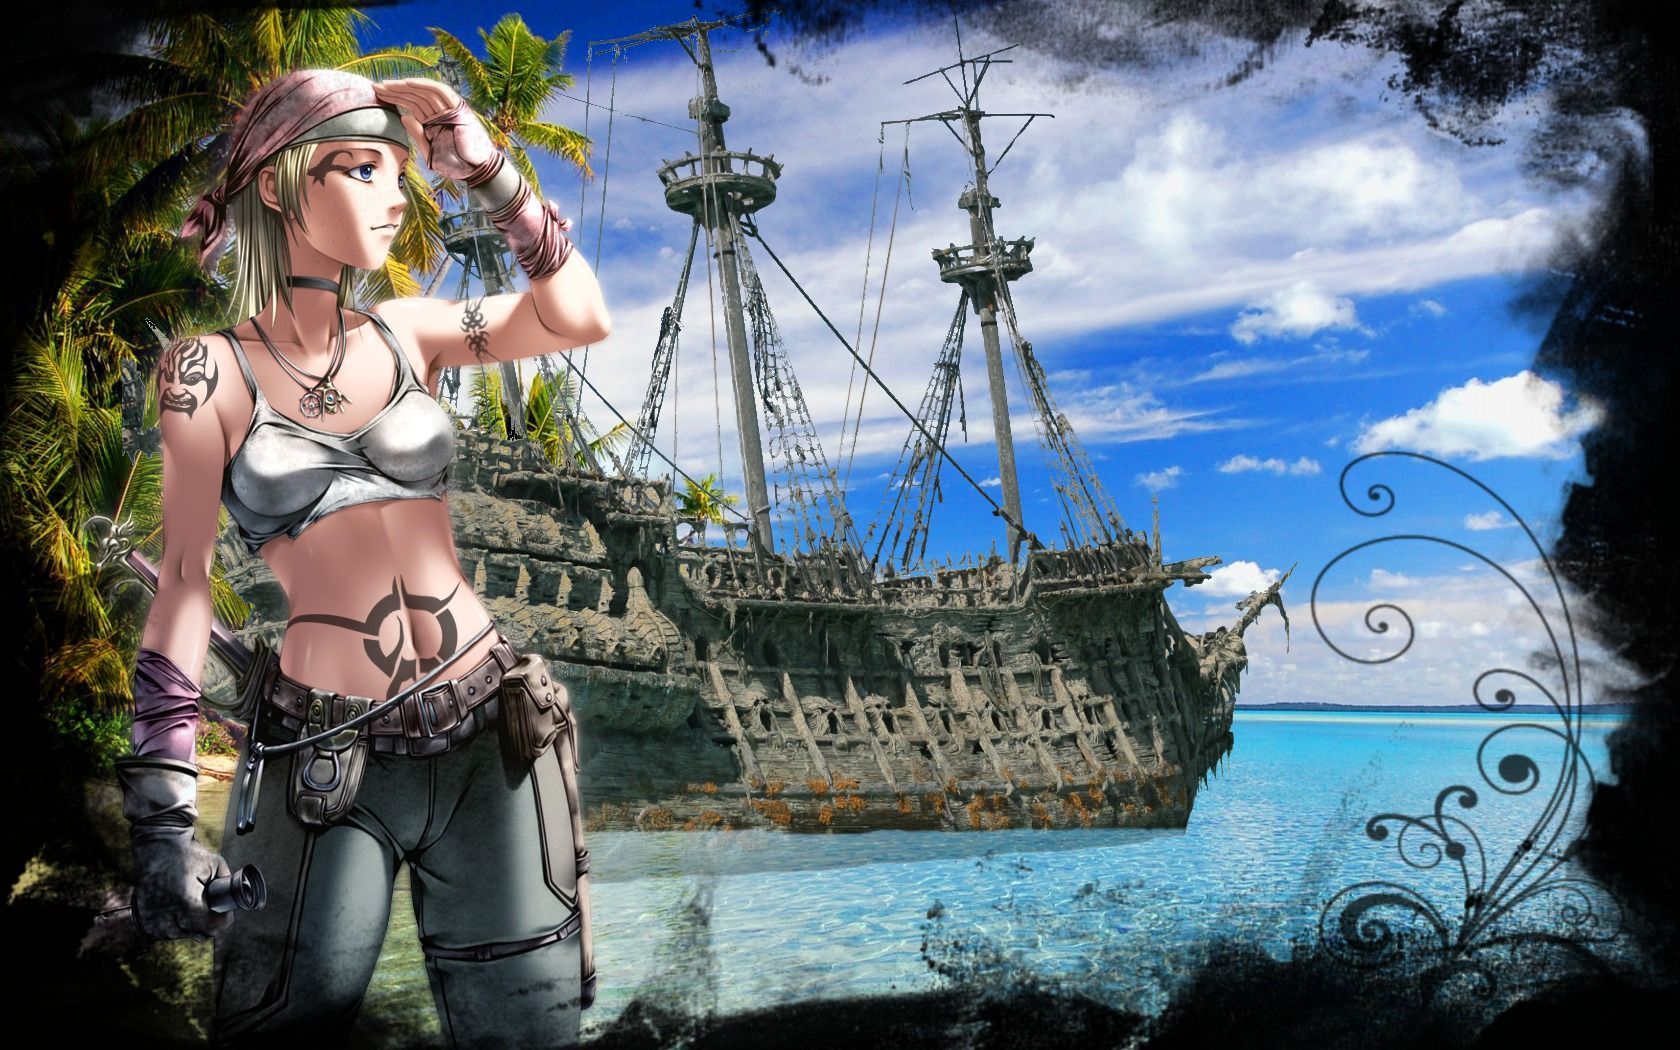 Pirate Wench Wallpaper. Pirate Wench